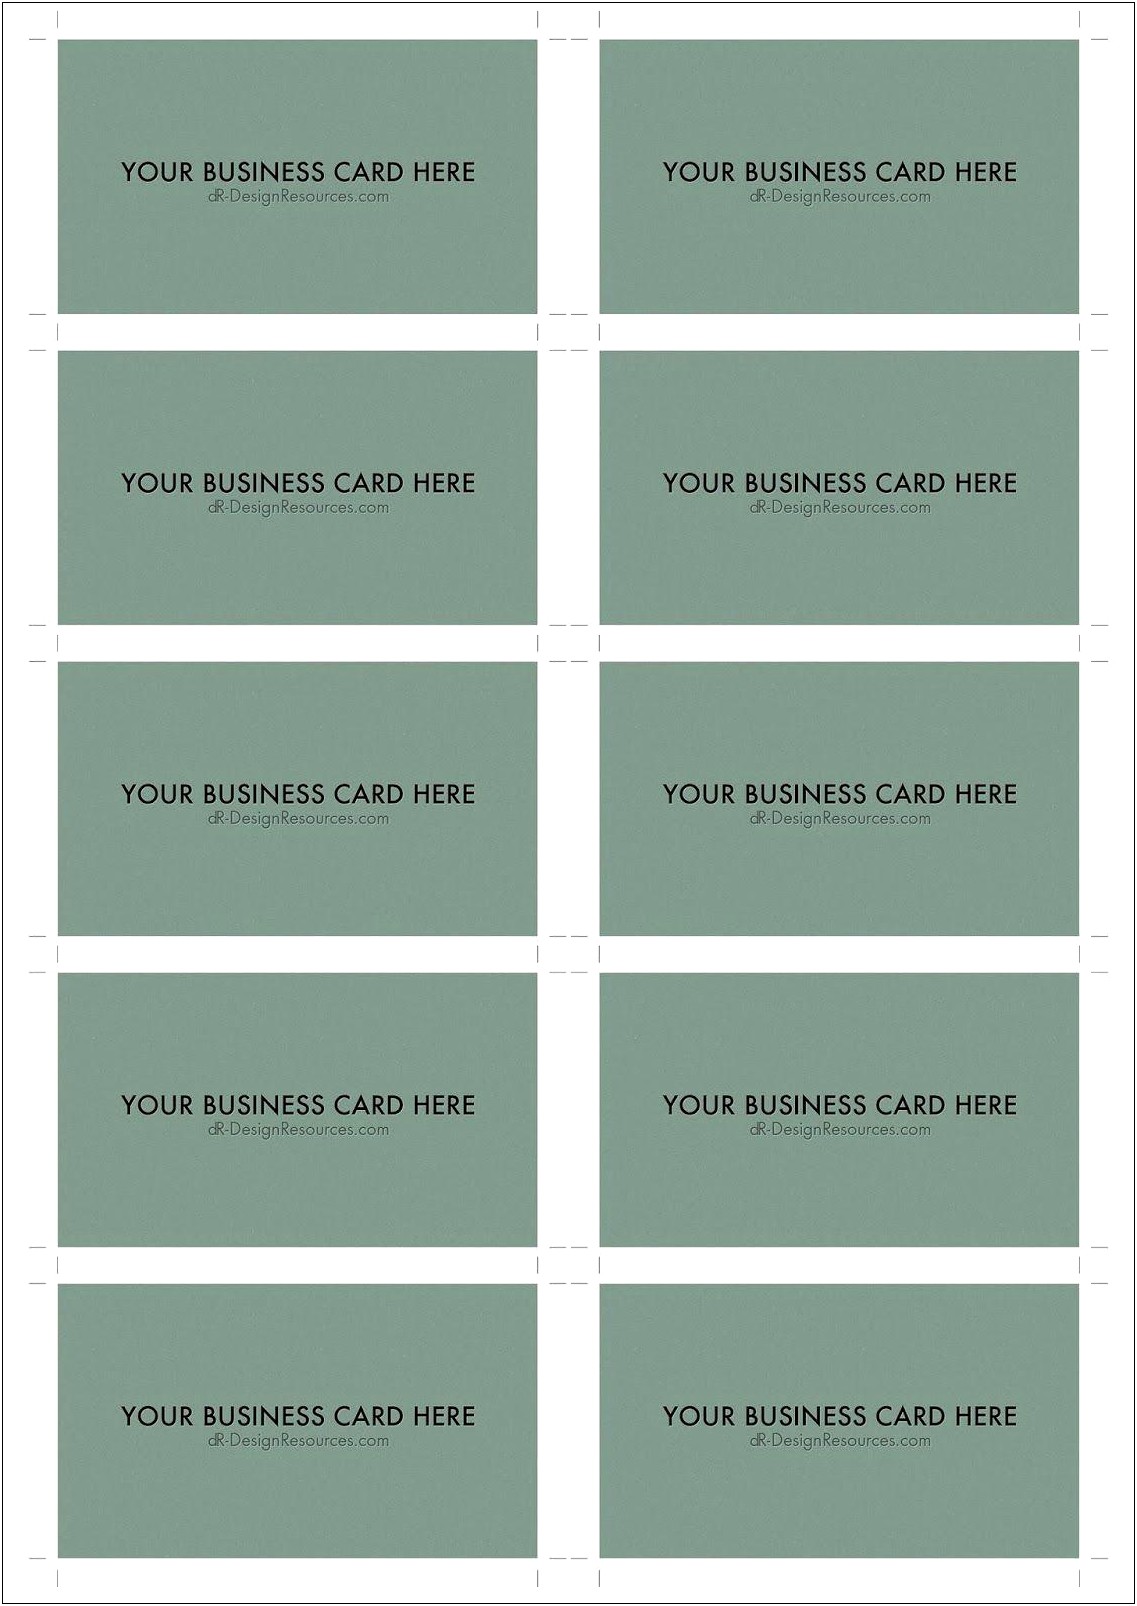 Avery Blank Business Card Templates Free